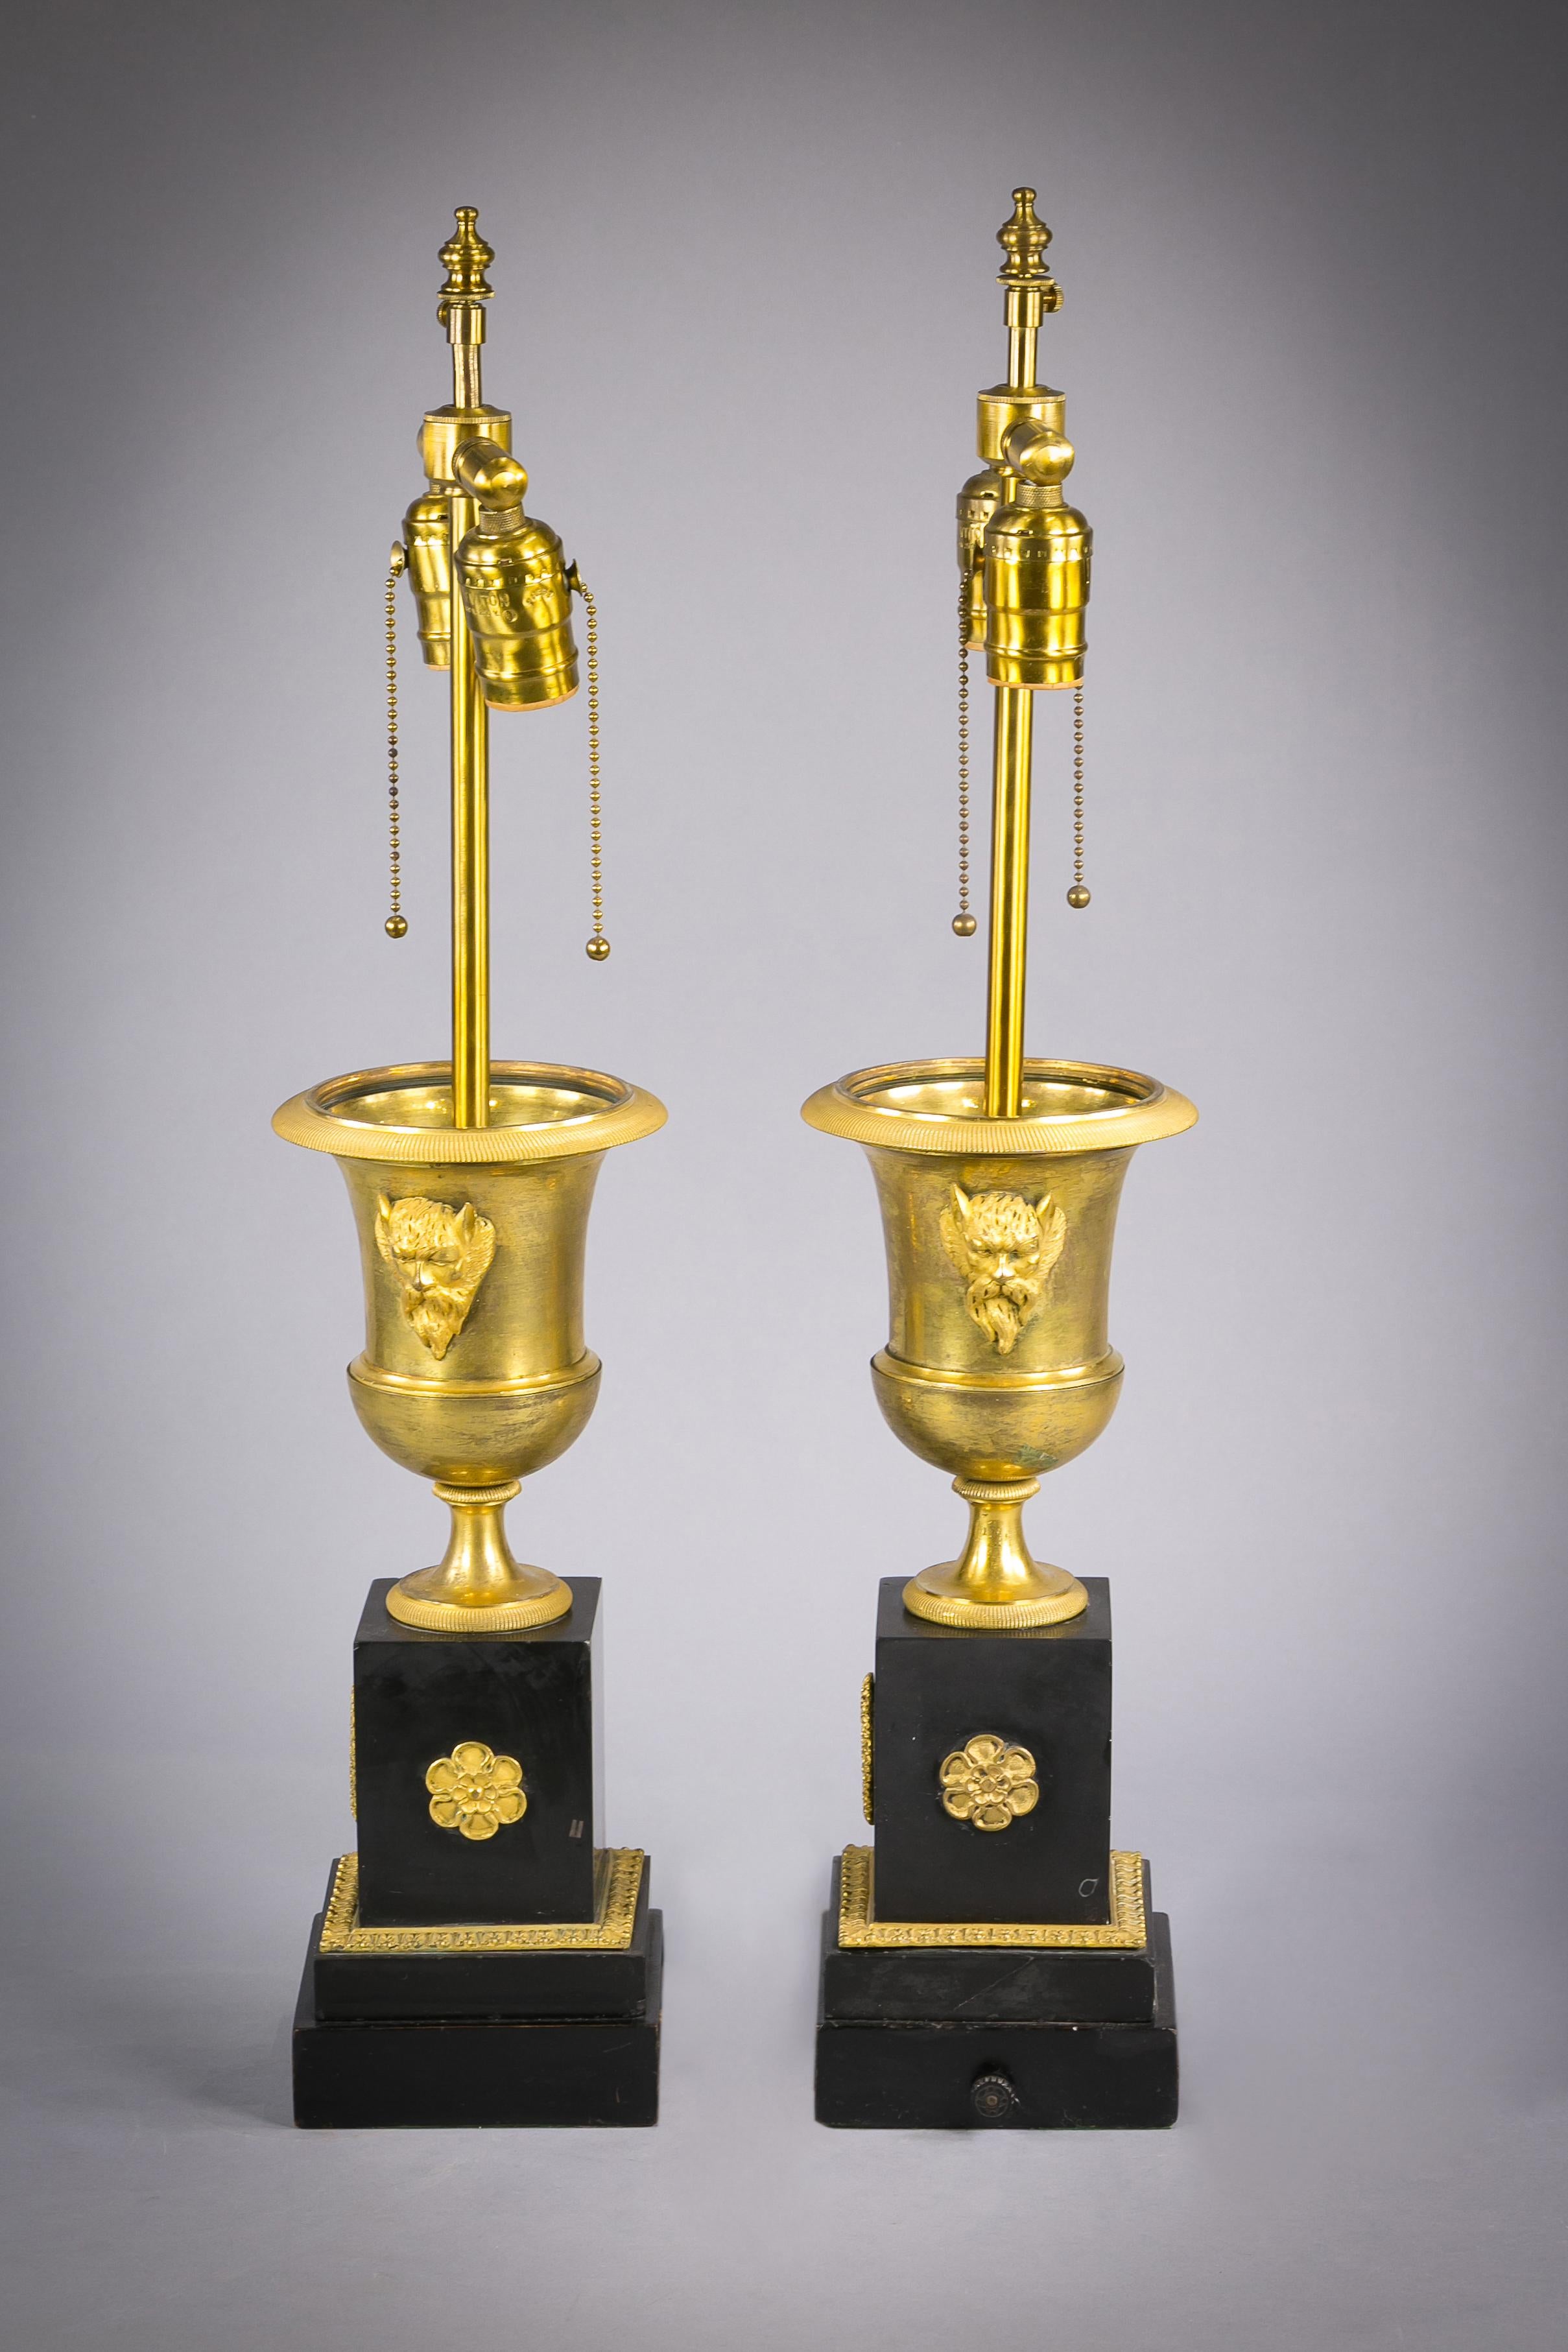 Pair of gilt bronze and black marble lamps, circa 1840.